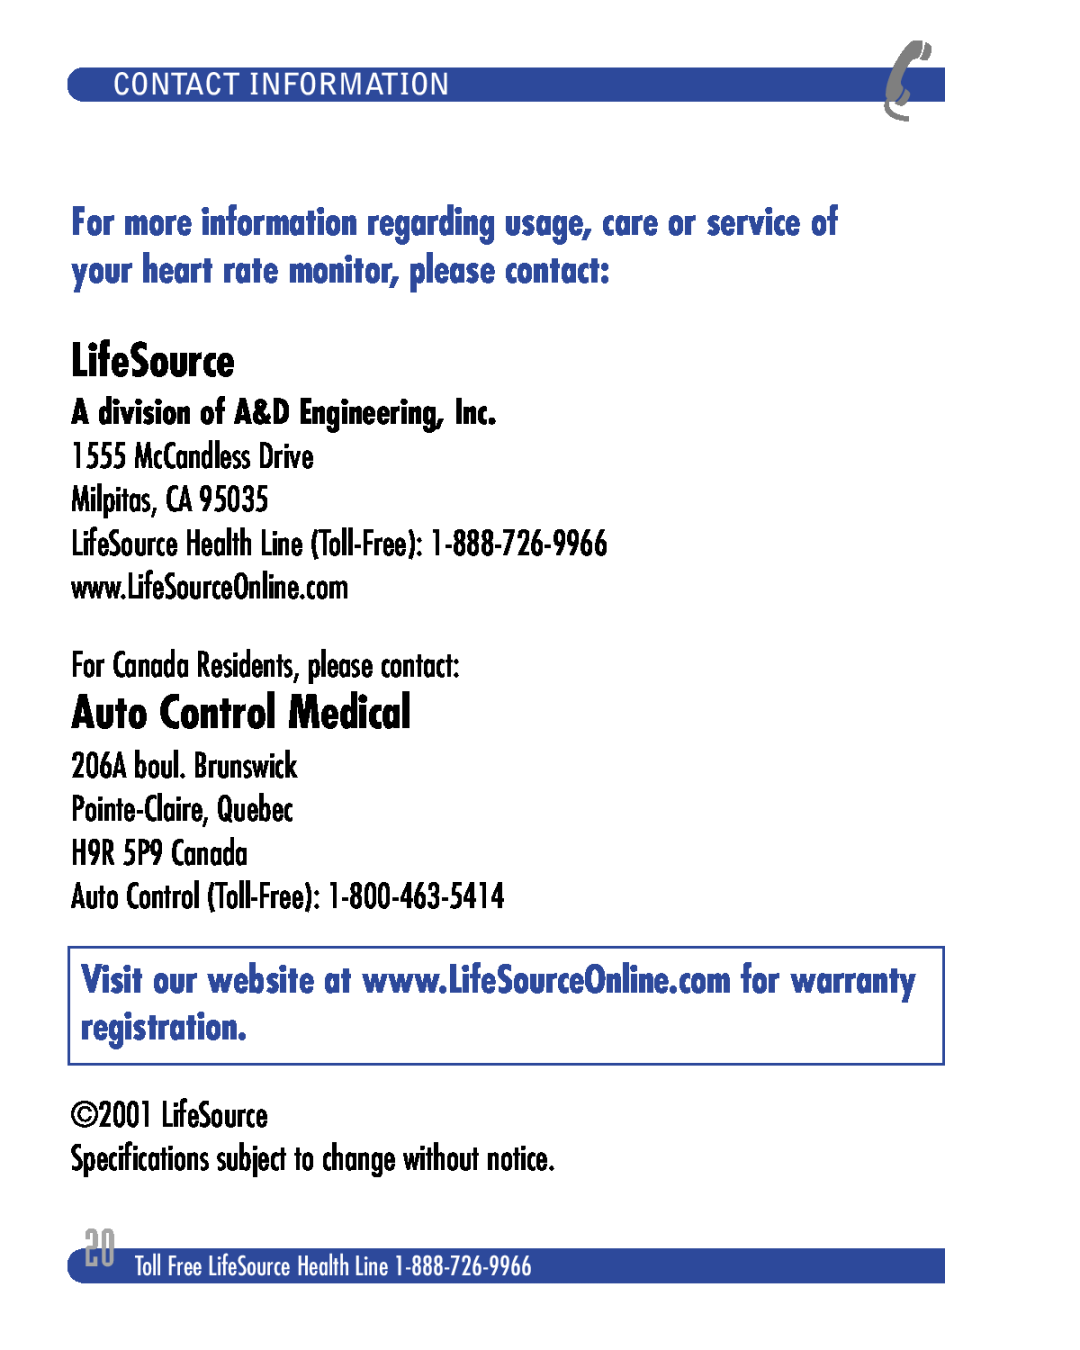 LifeSource XC100, XC200 manual Contact Information, LifeSource, Auto Control Medical, A division of A&D Engineering, Inc 